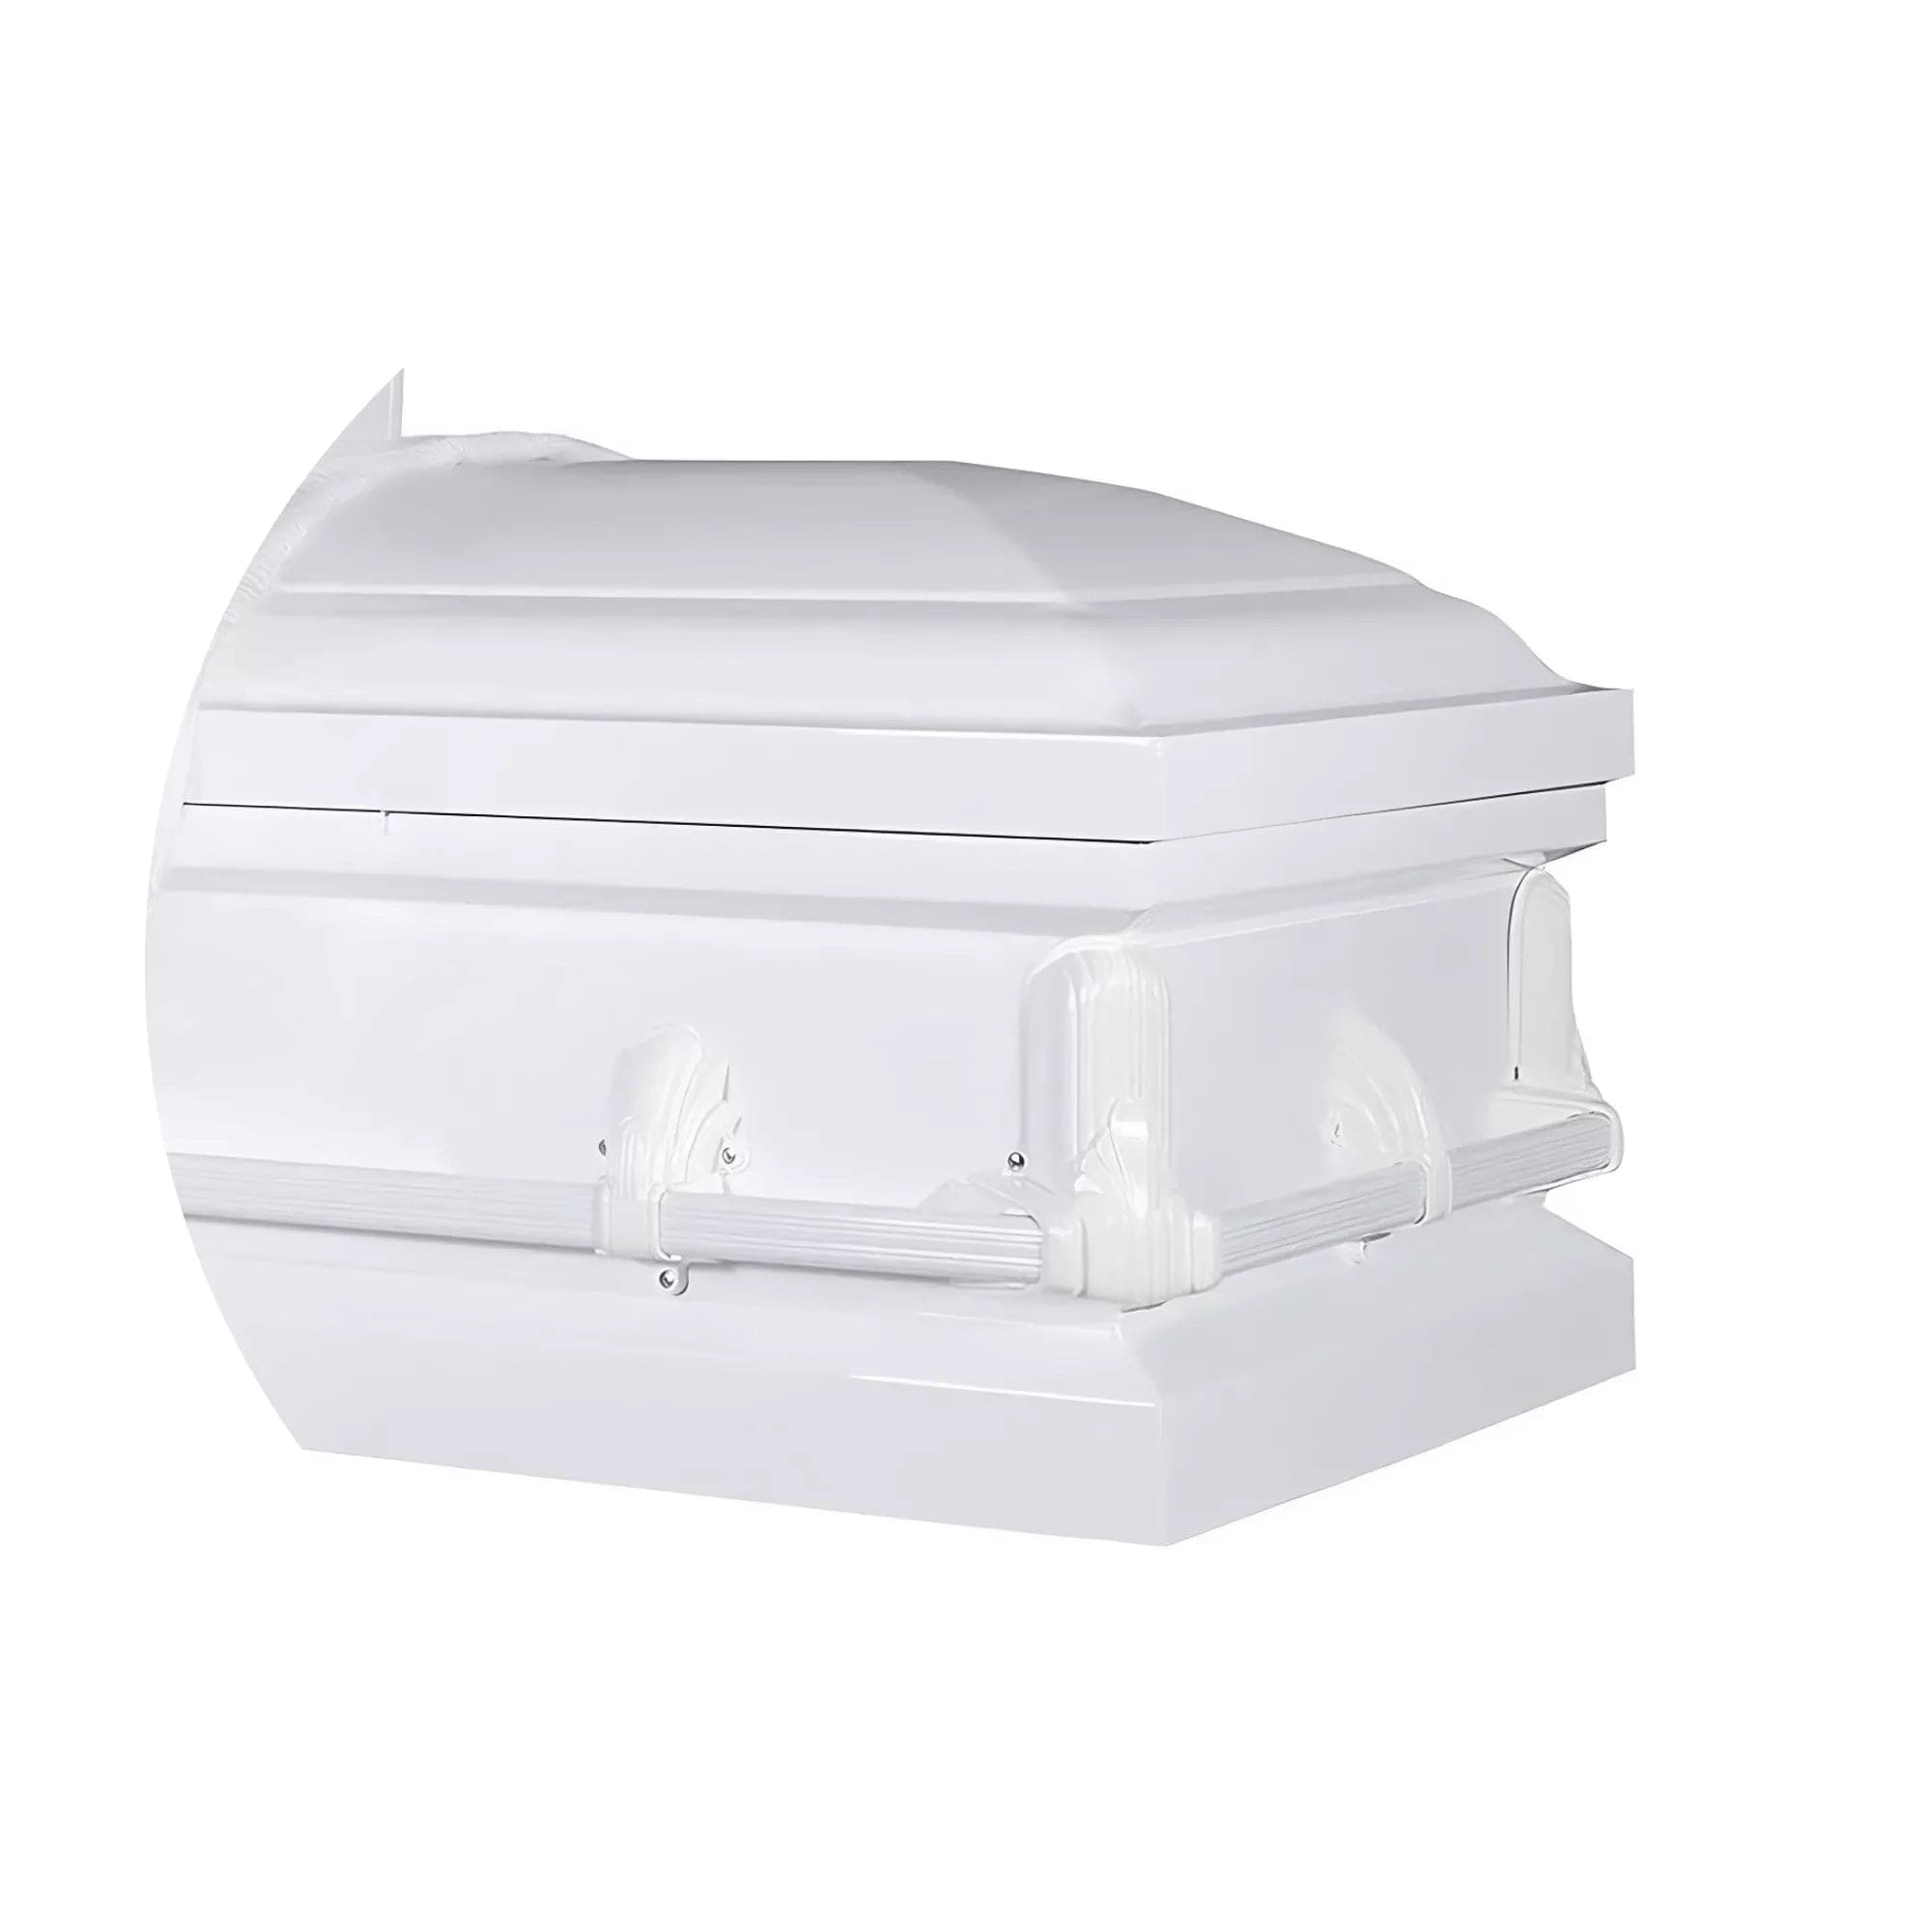 Load image into Gallery viewer, Andover Series | White Steel Casket with White Interior and White Hardware
